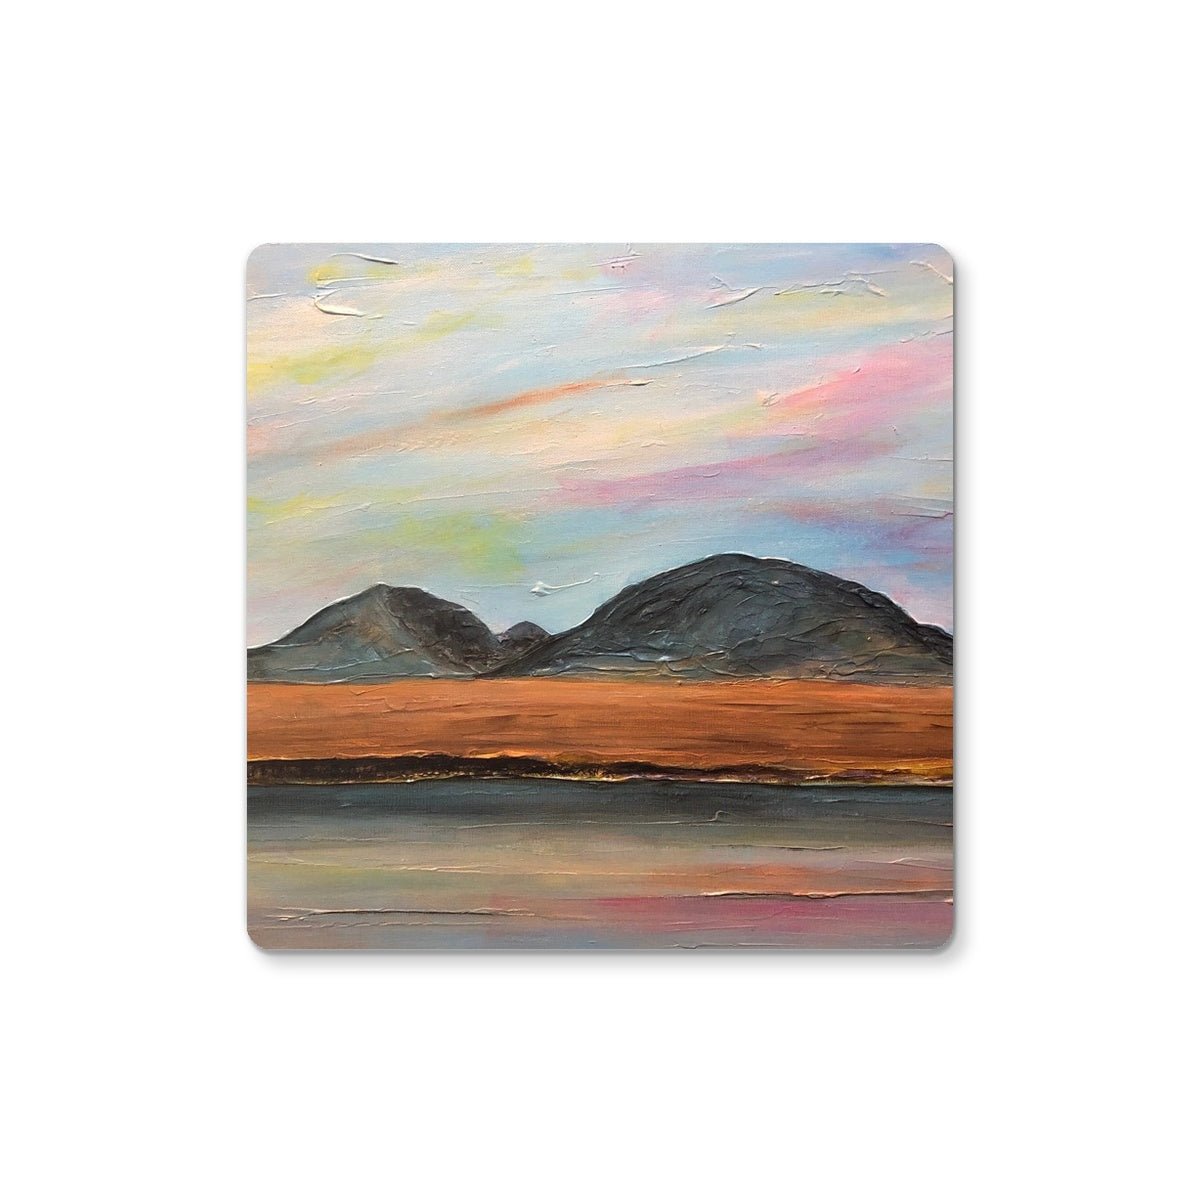 Jura Dawn Art Gifts Coaster-Coasters-Hebridean Islands Art Gallery-4 Coasters-Paintings, Prints, Homeware, Art Gifts From Scotland By Scottish Artist Kevin Hunter